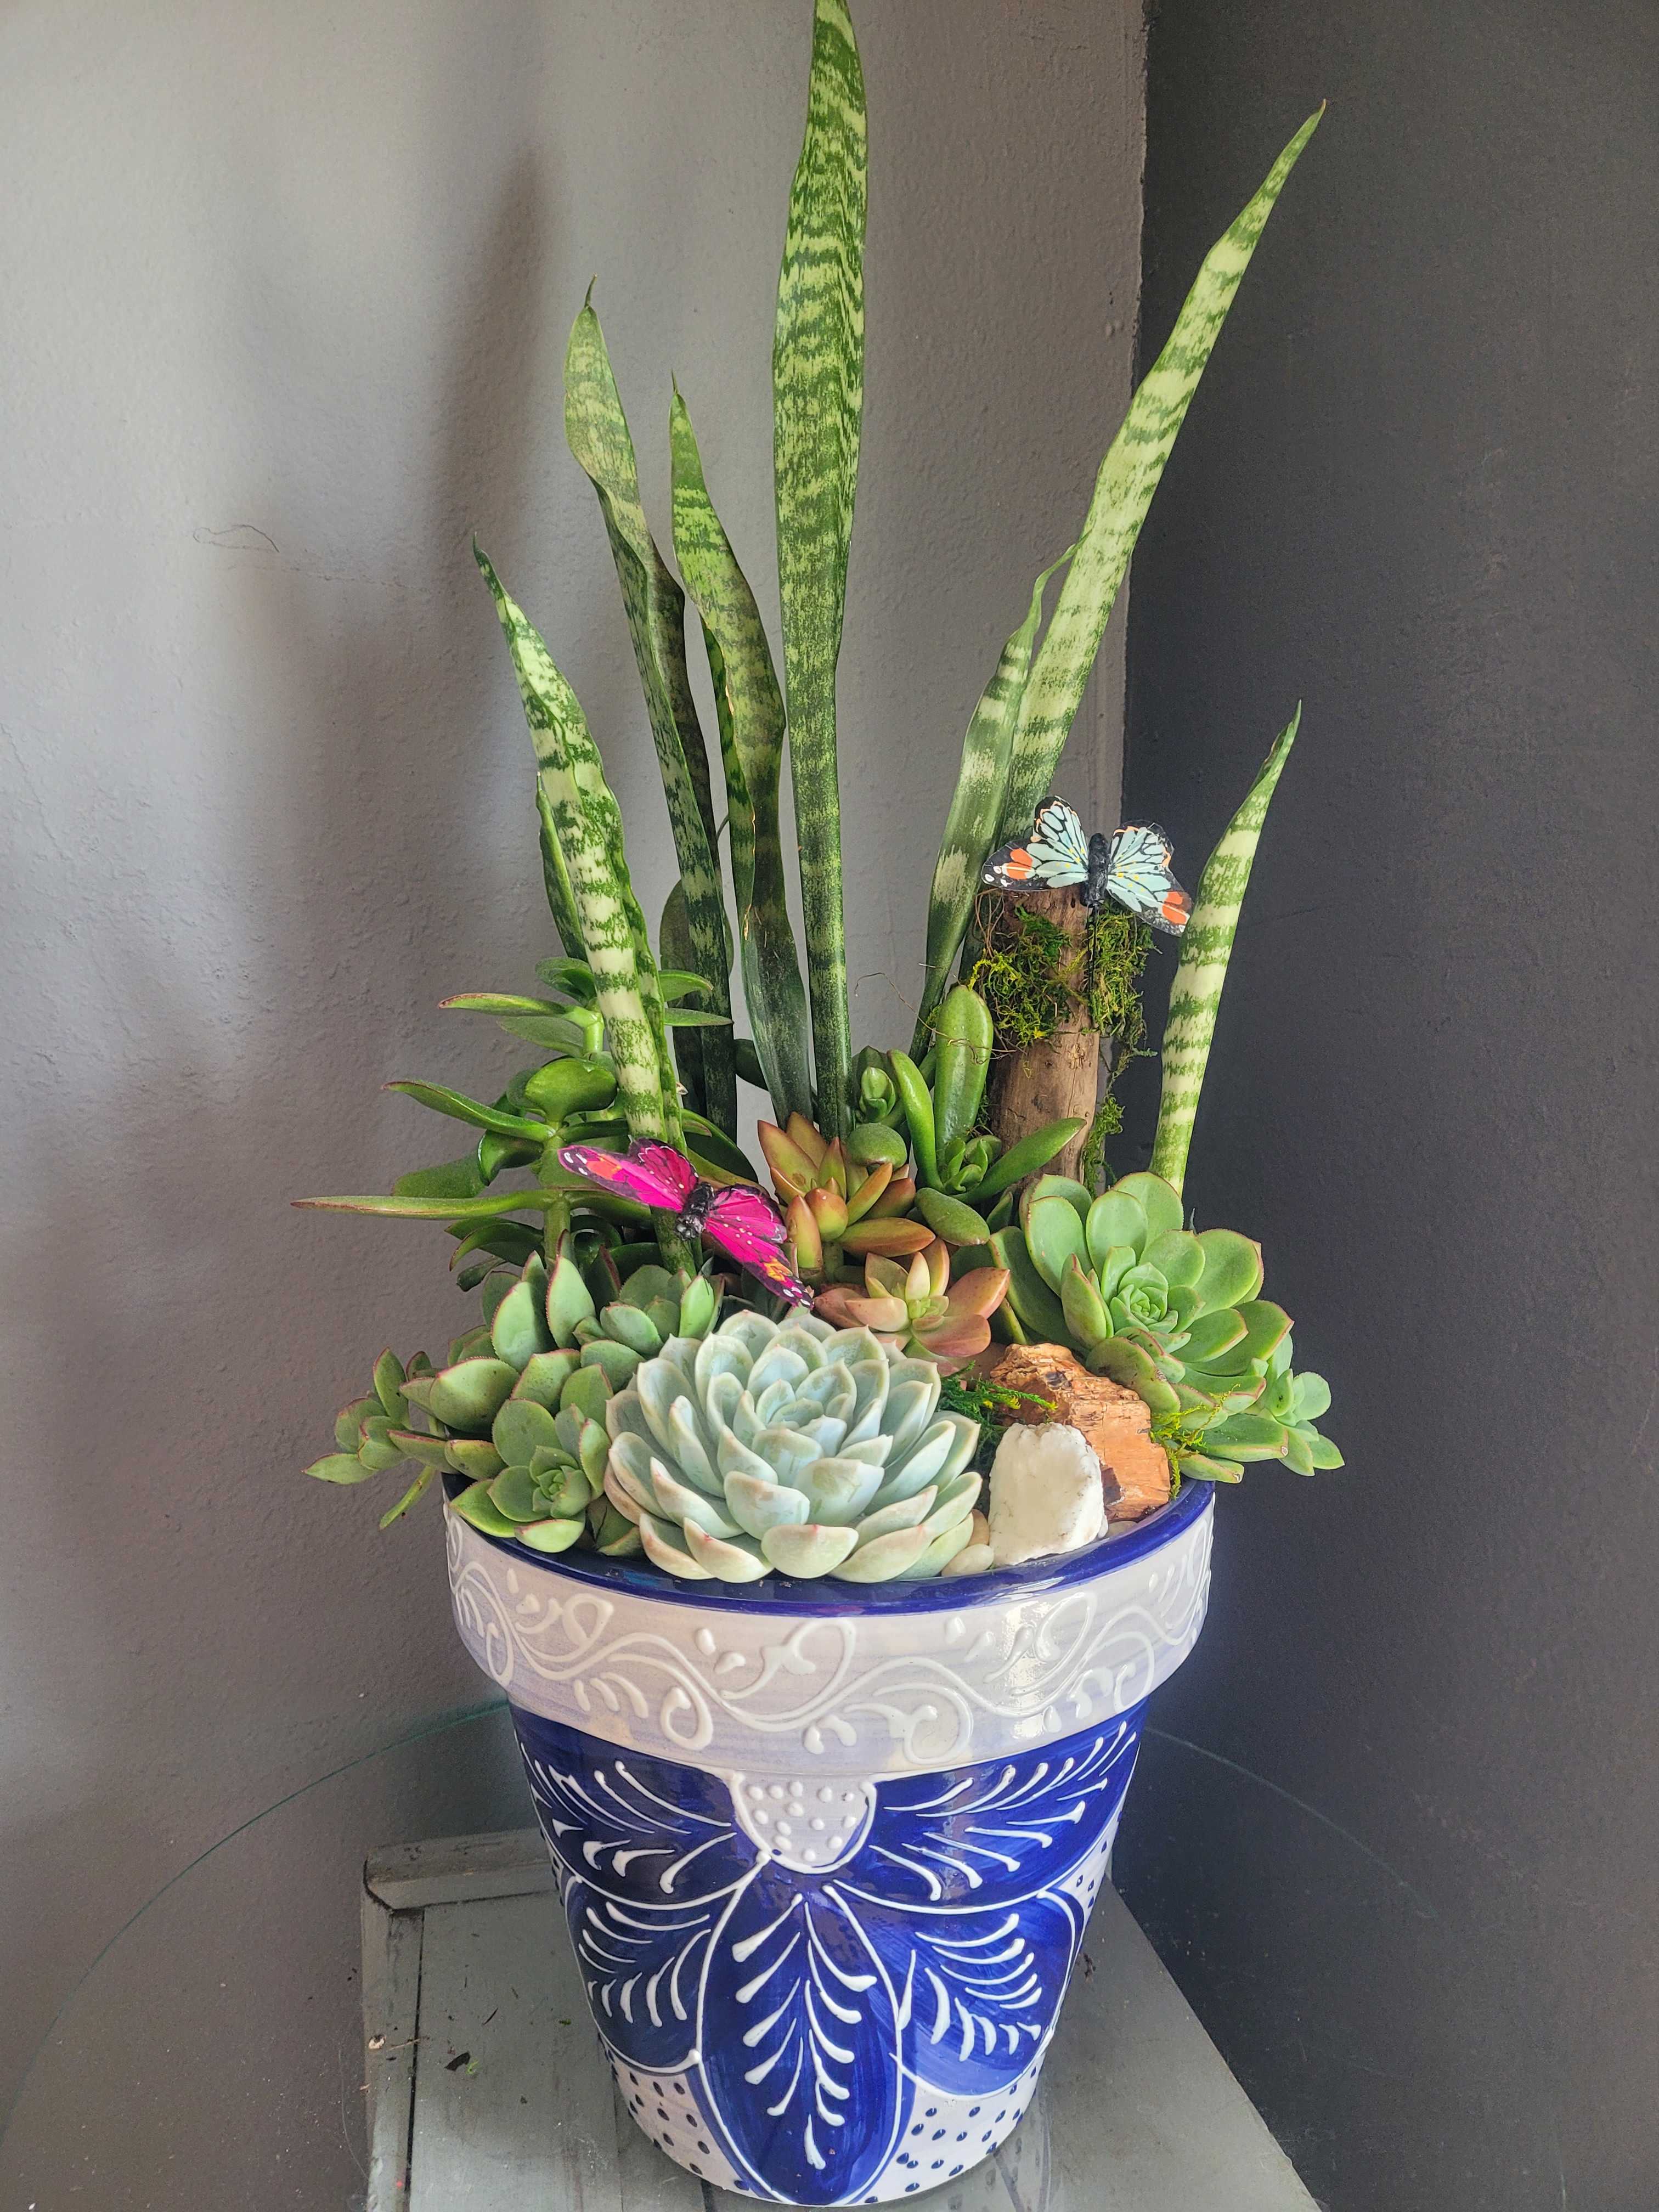 Large Blue and White Talavera  - This arrangement in this hand painted Mexican pottery would be a striking addition to any garden, patio or home.